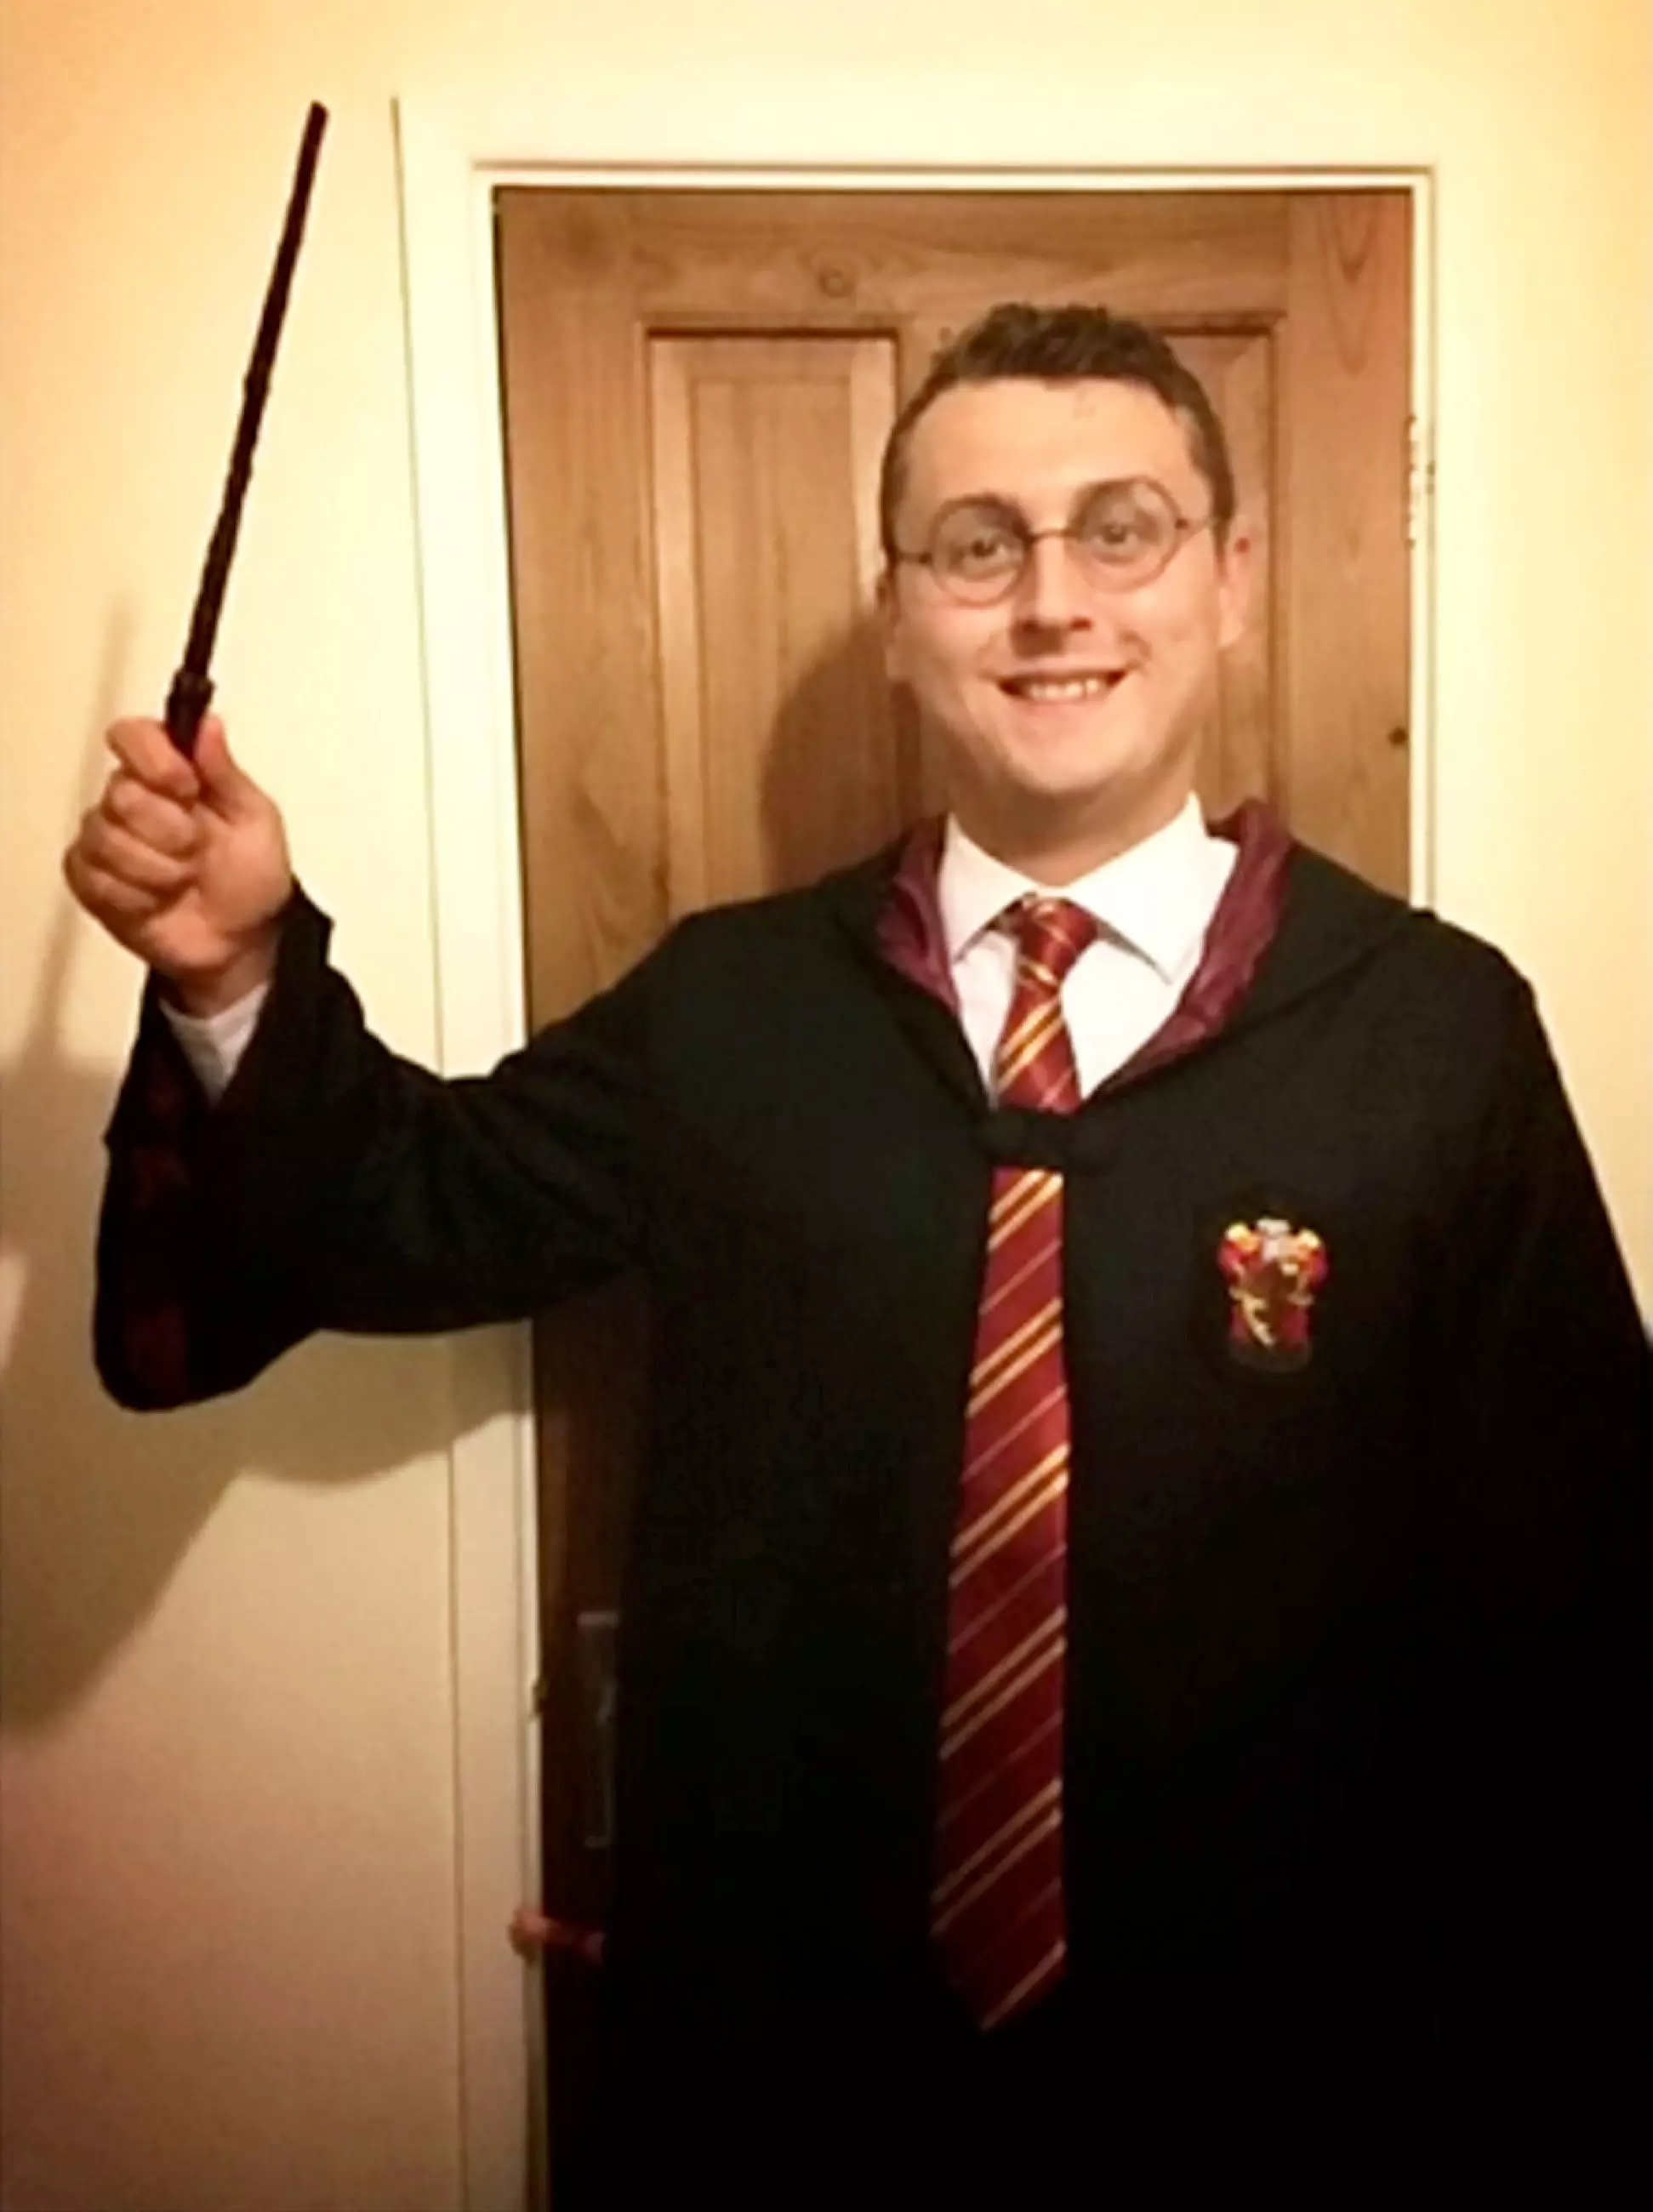 Dressing up as the 'real' Harry Potter.